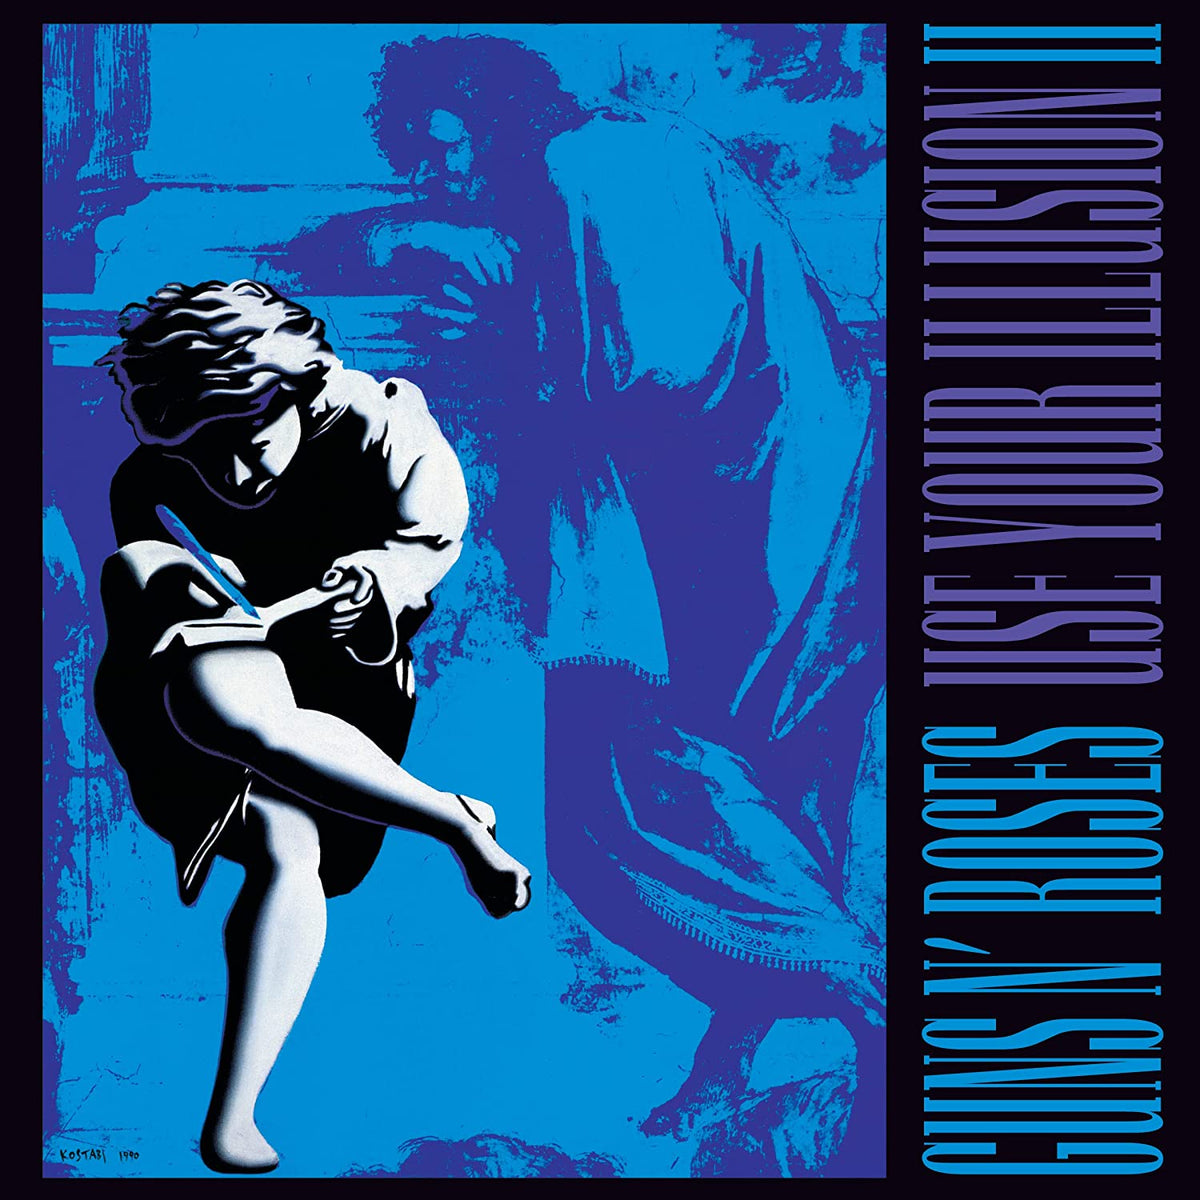 Guns N' Roses - Use Your Illusion II (Deluxe Edition) (CD)